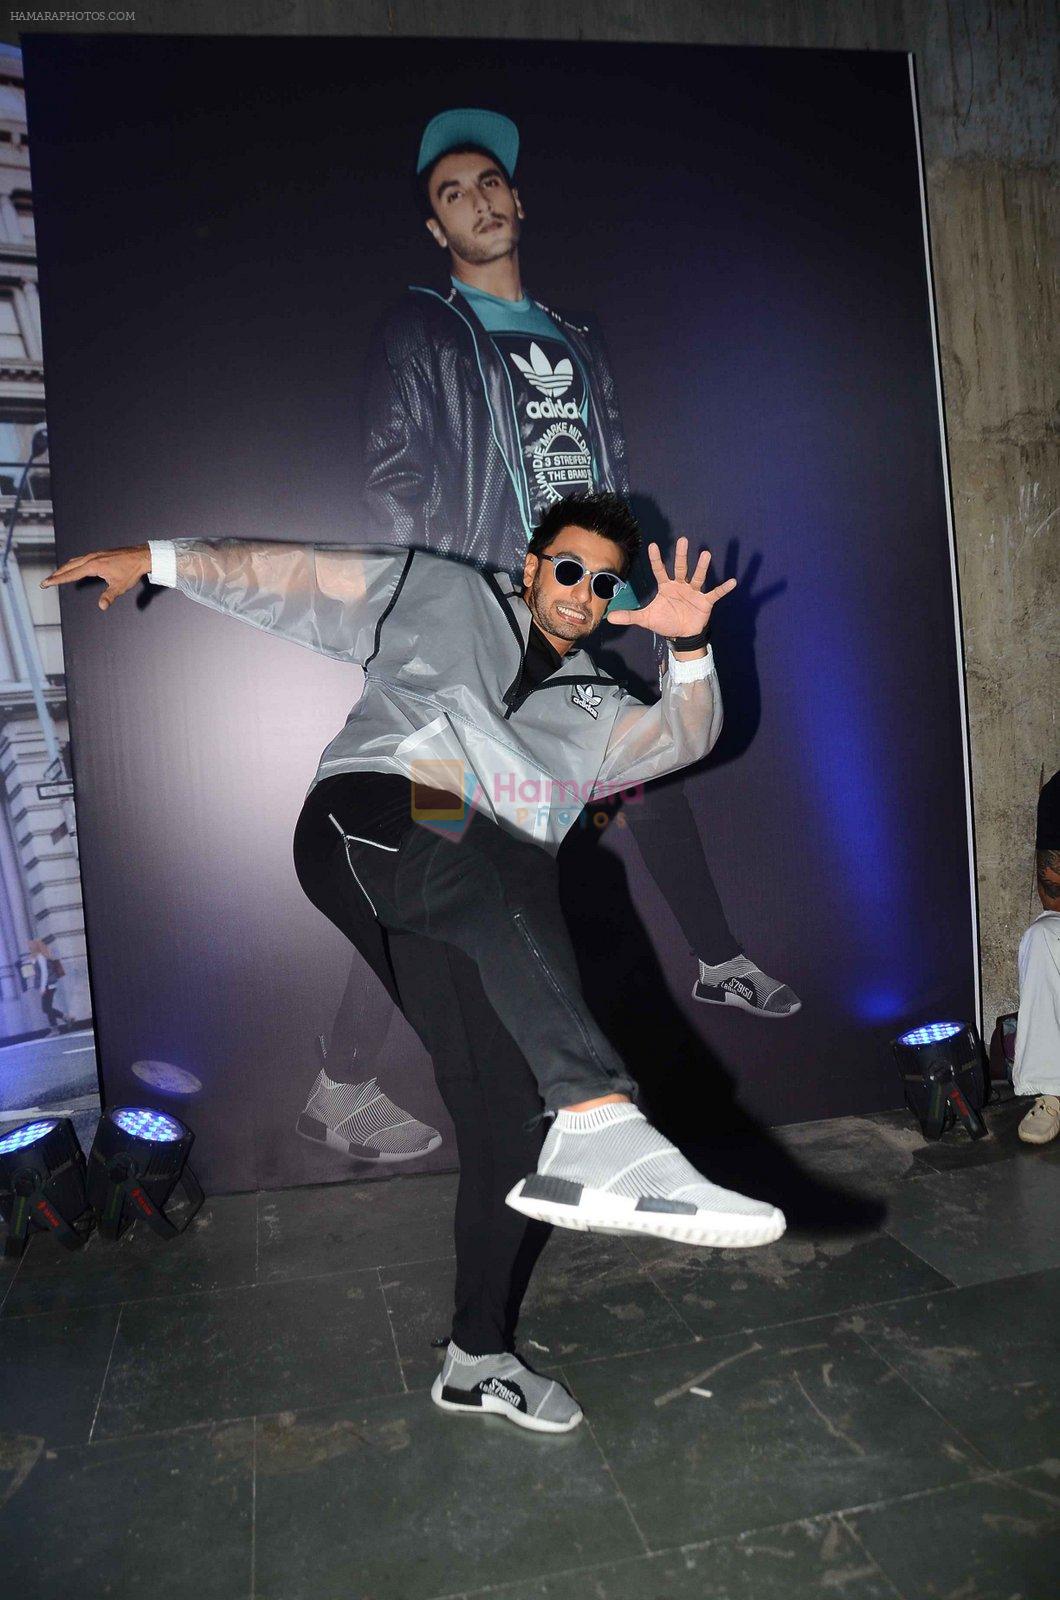 Ranveer Singh at Adidas launch in Mumbai on 12th March 2016